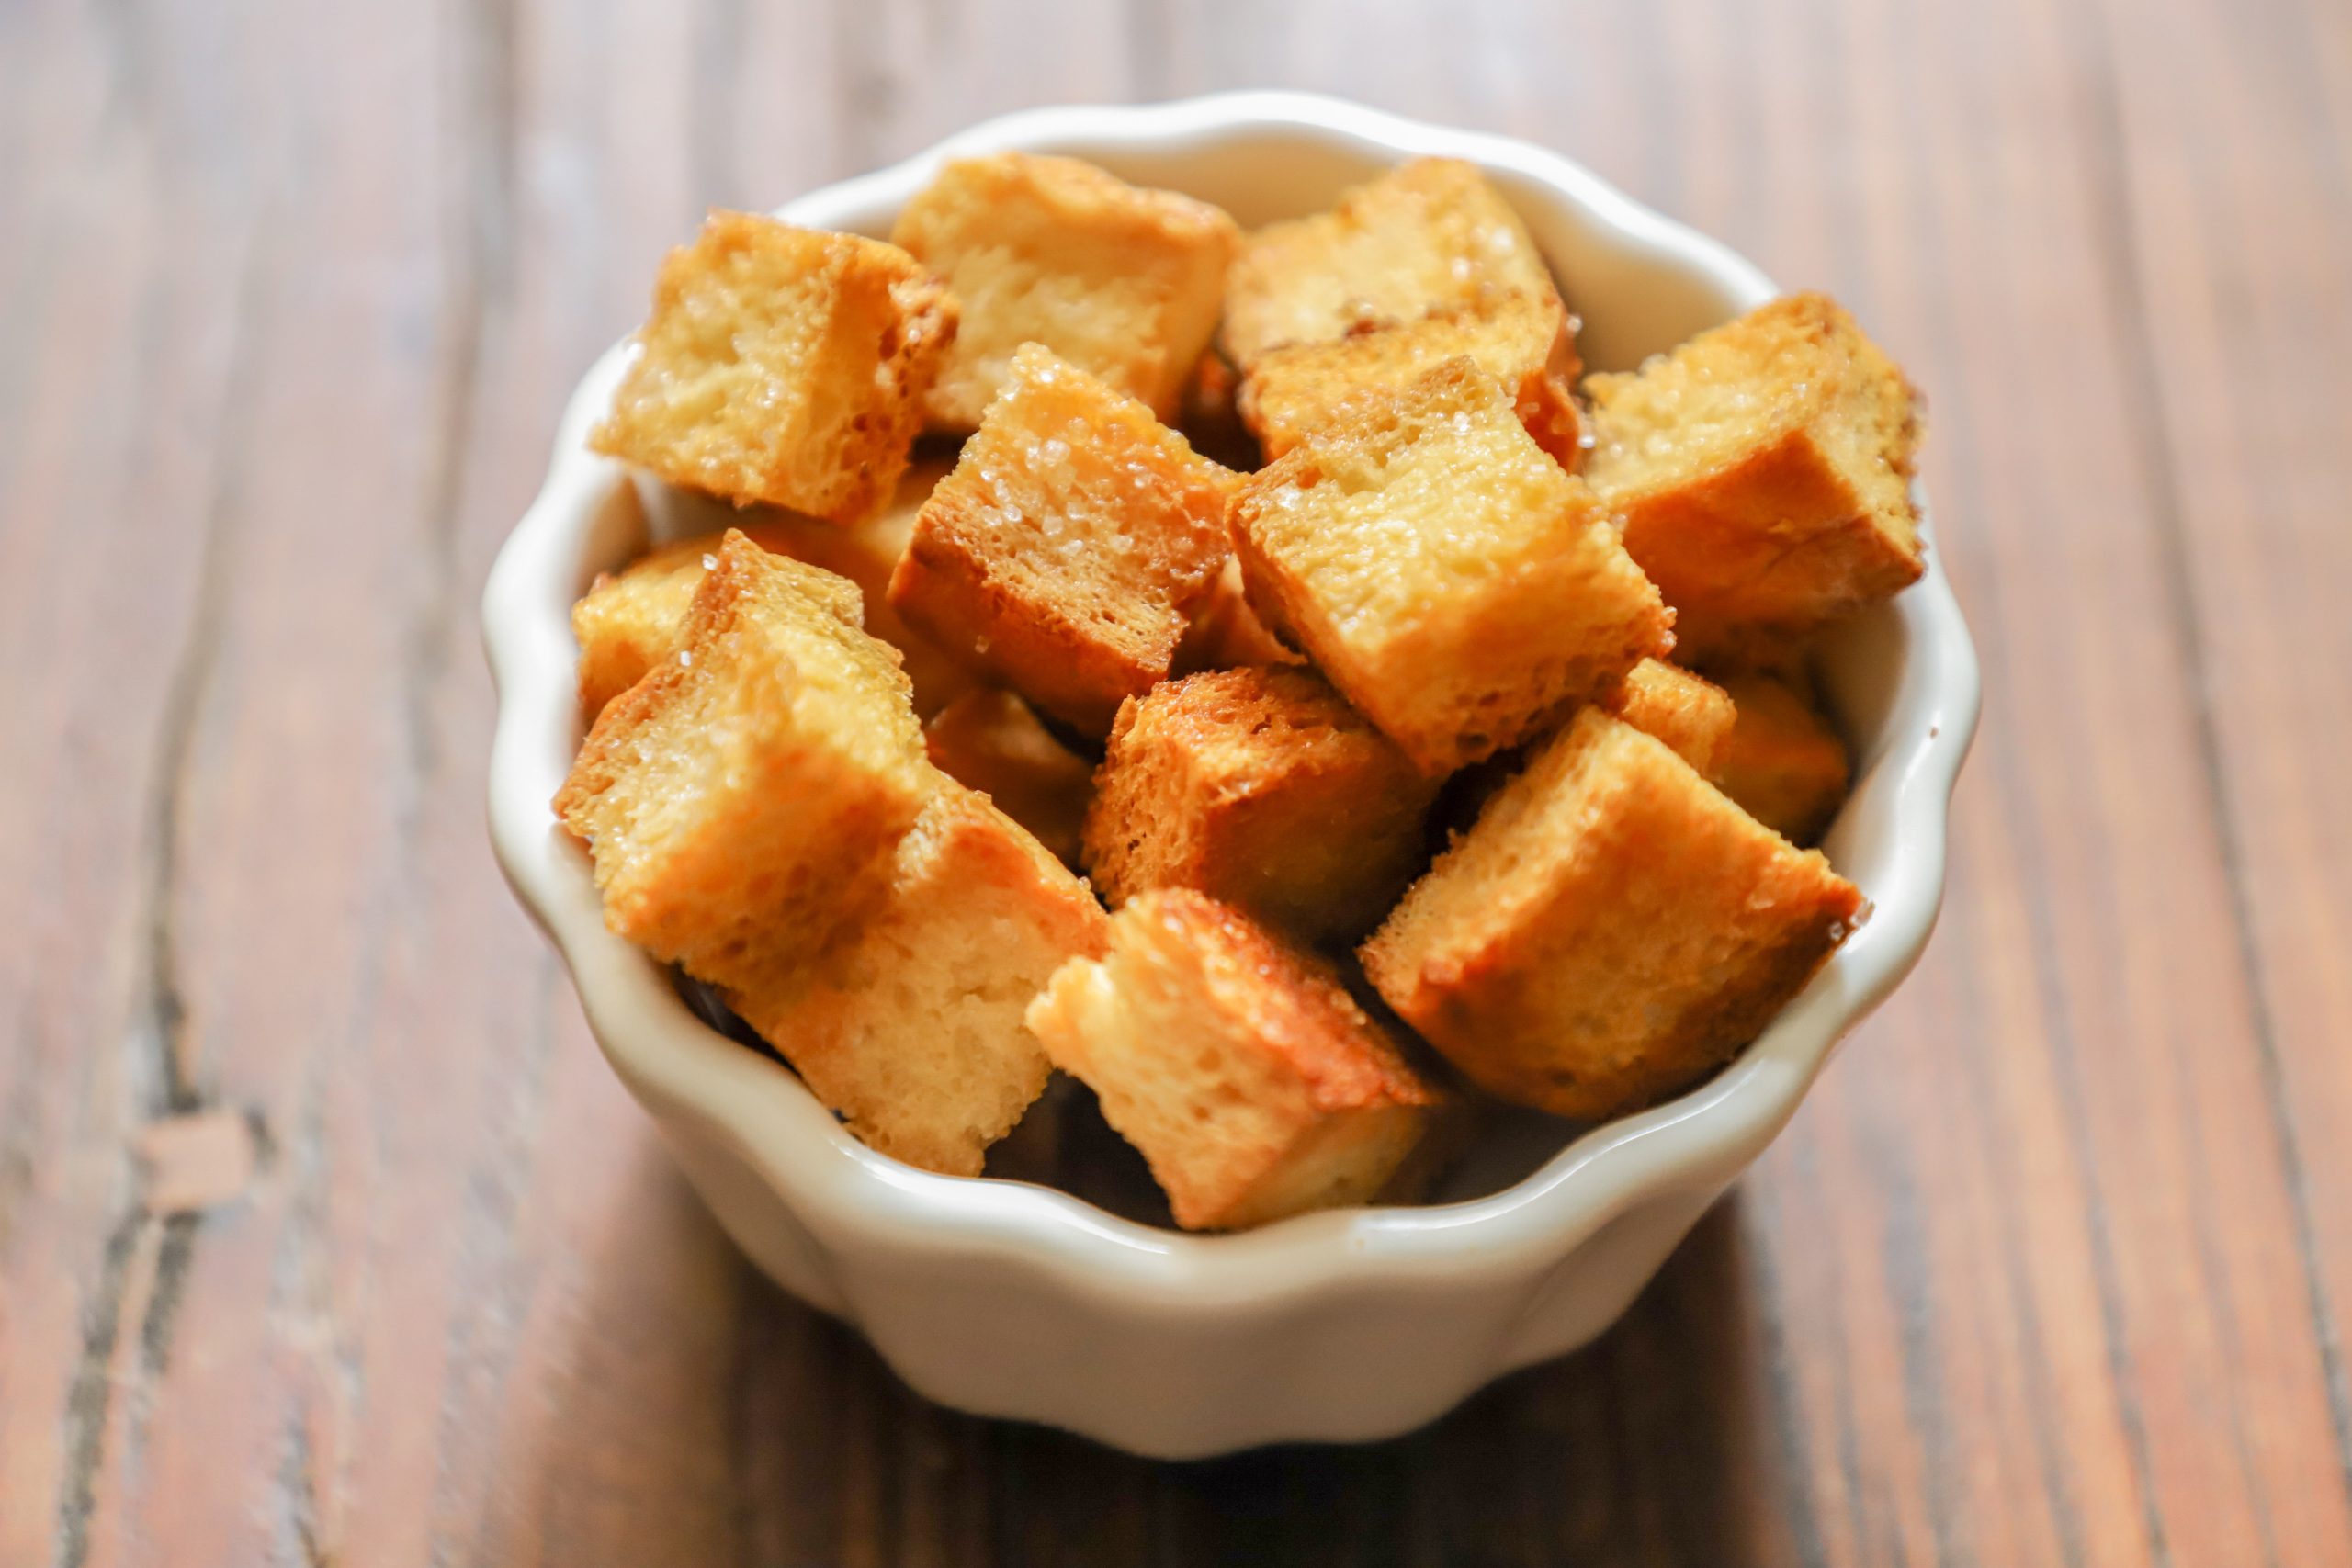 Learn How To Make Homemade Croutons